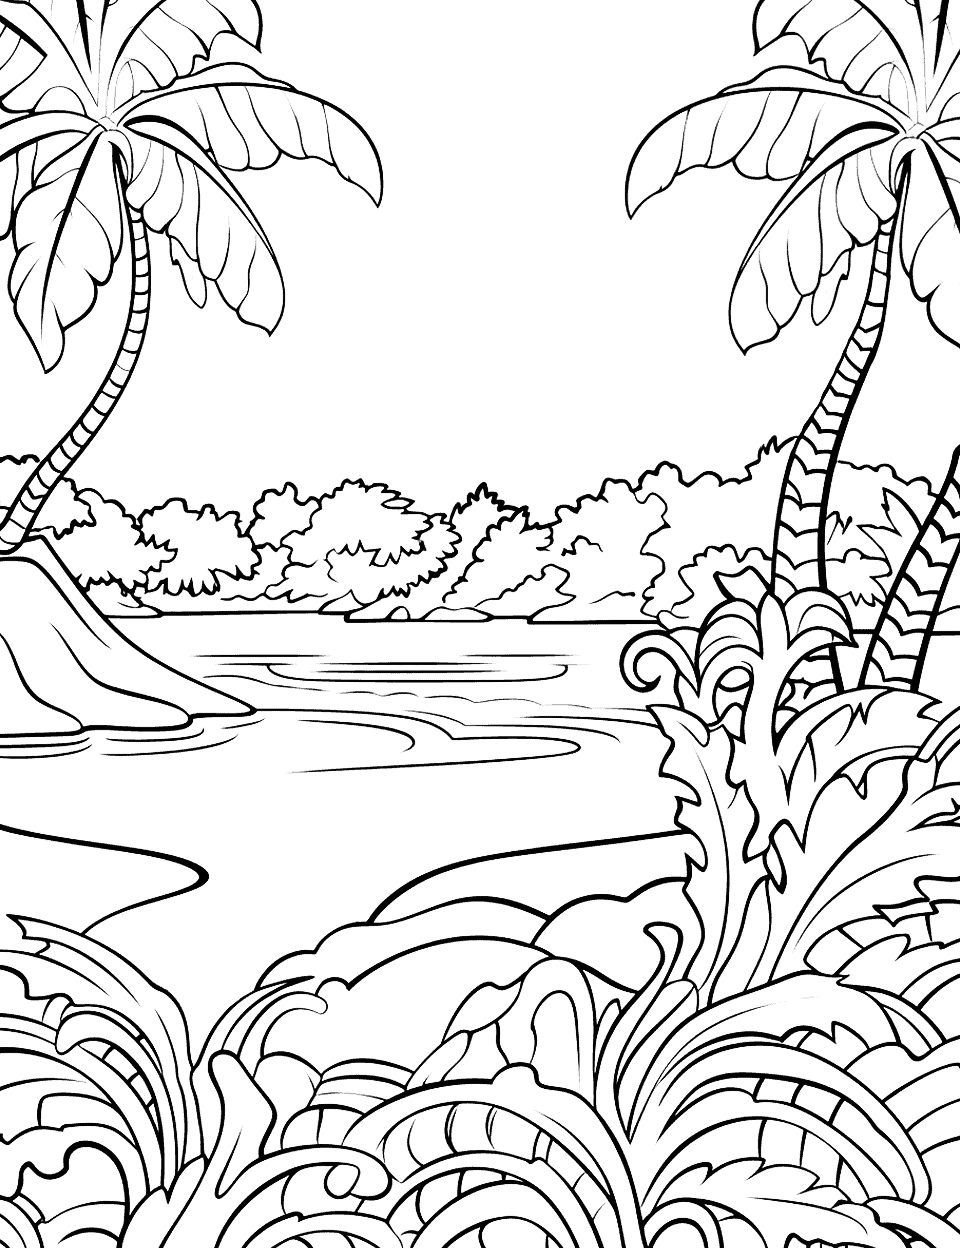 Tropical Island Adult Coloring Page - A tropical island with exotic flora and palm trees.